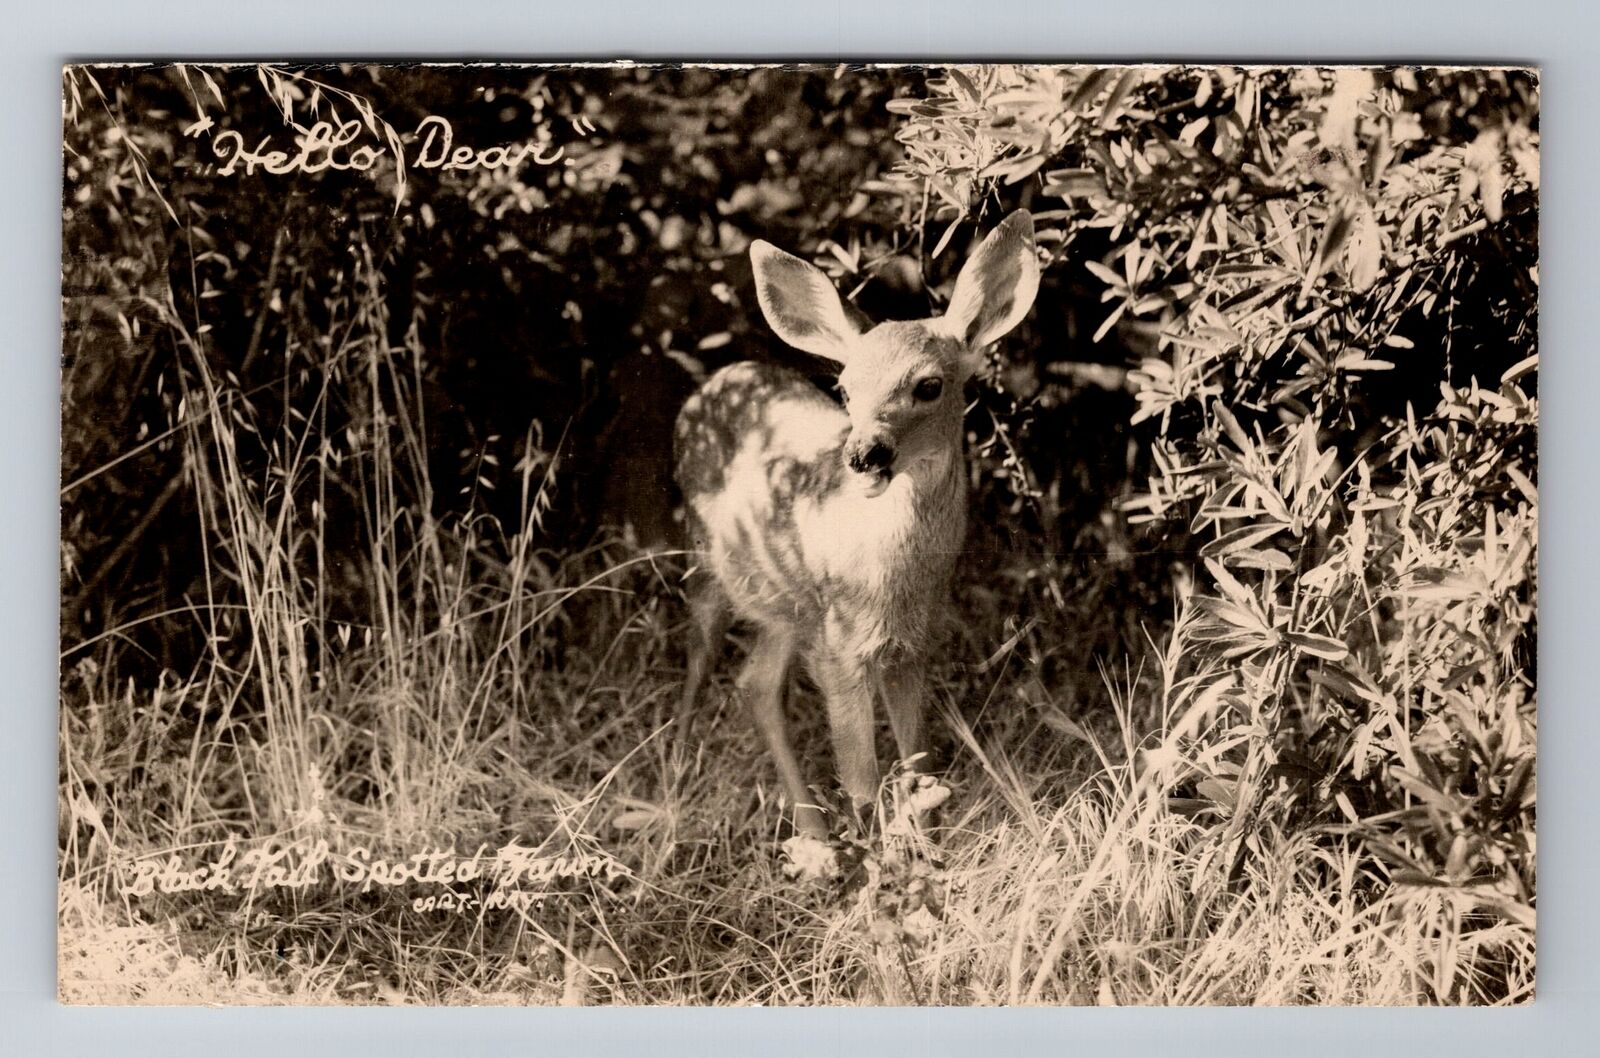 Black Tail Spotted Fawn, Hello Deer RPPC, Antique, Vintage c1950 Postcard